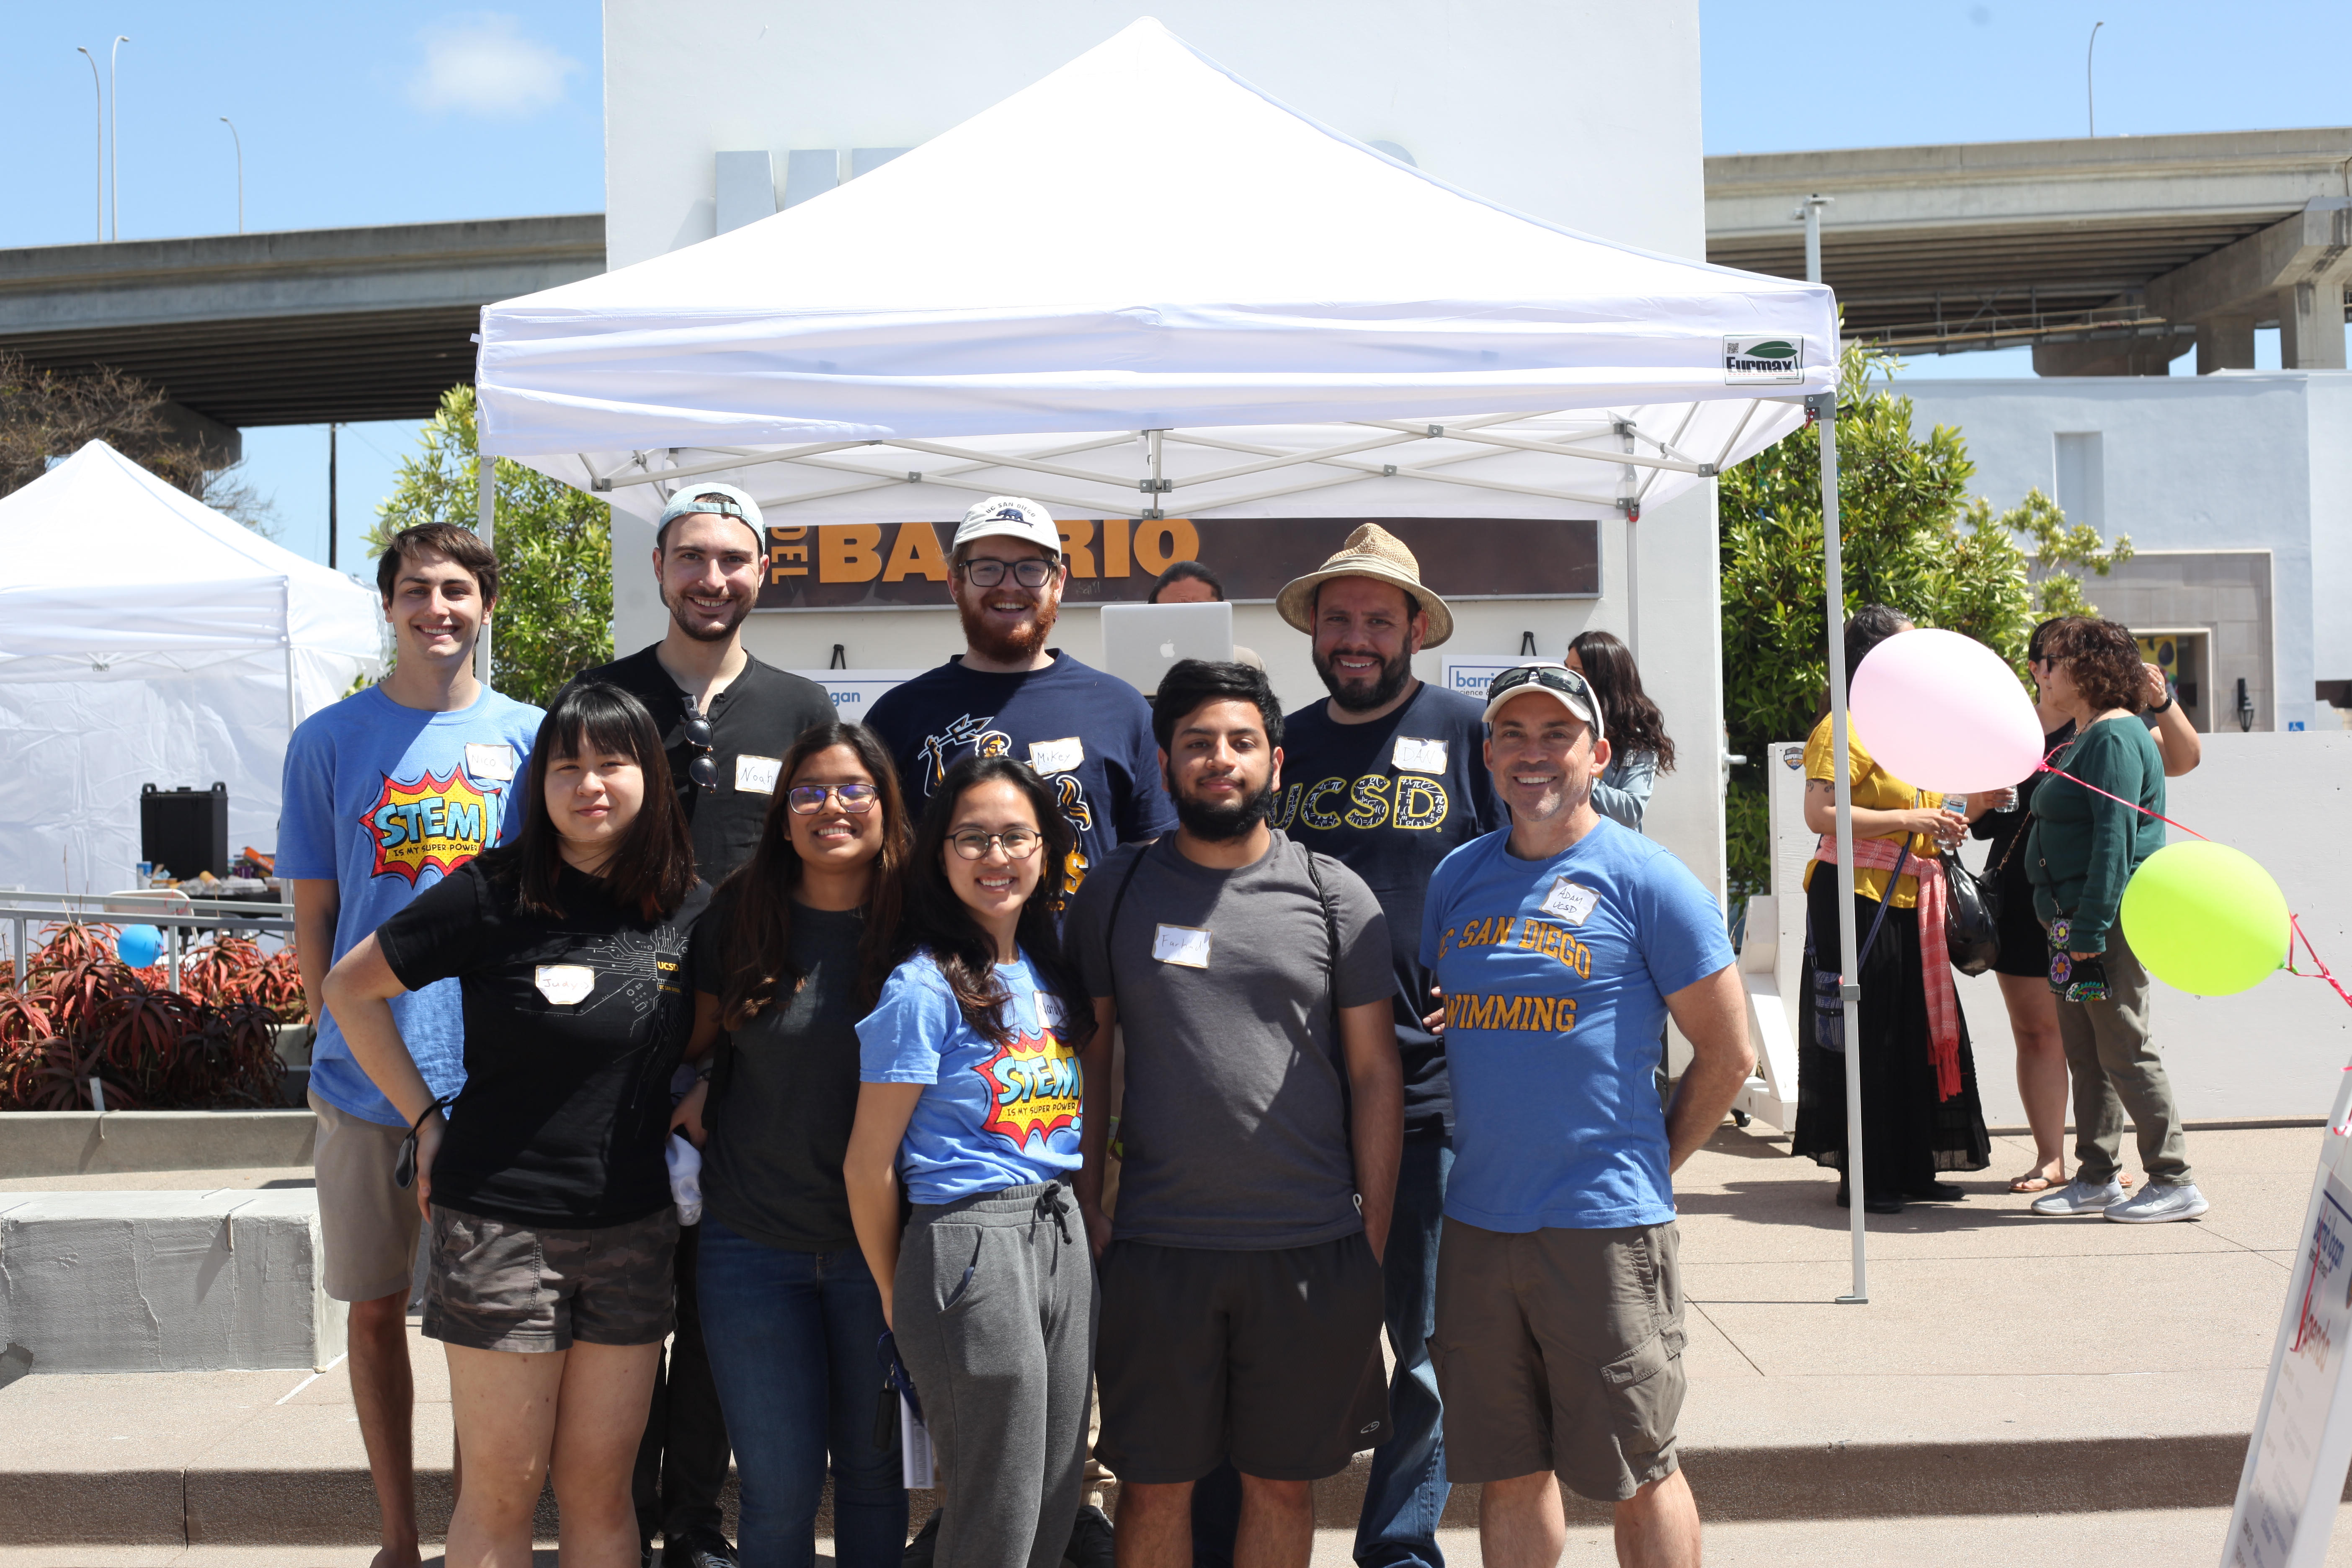 This image contains 9 people posing in front of a canopy. The people are representatives of UCSD at the 2022 SD STEAM Expo